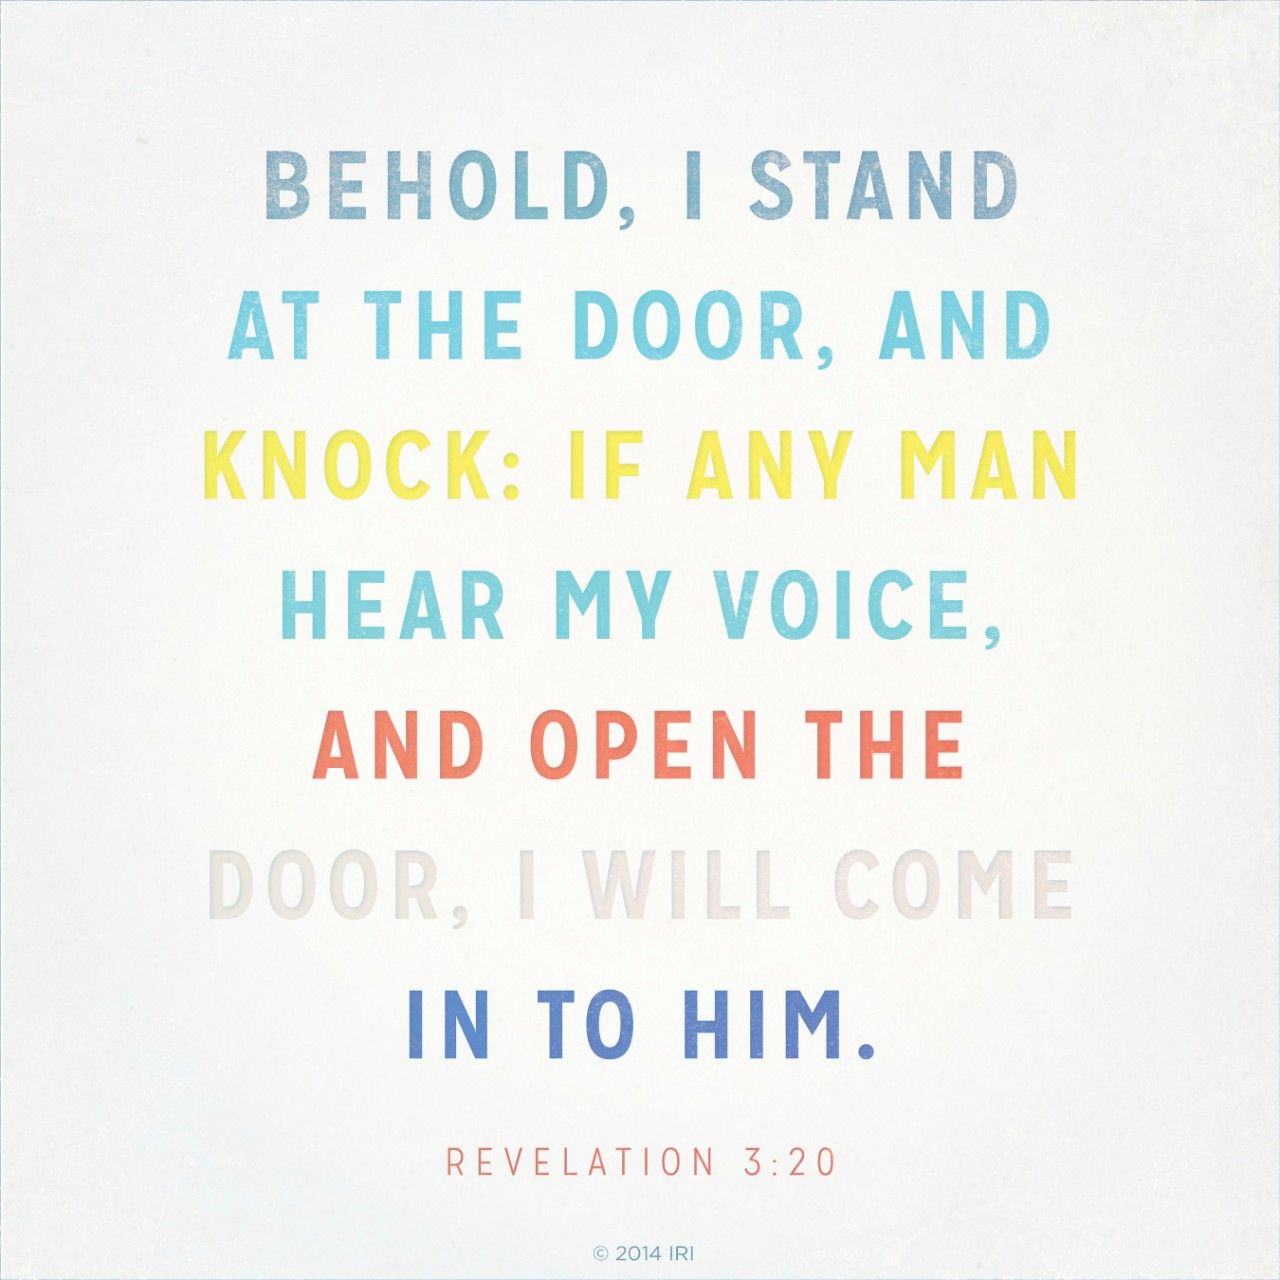 “Behold, I stand at the door, and knock: if any man hear my voice, and open the door, I will come in to him.”—Revelation 3:20